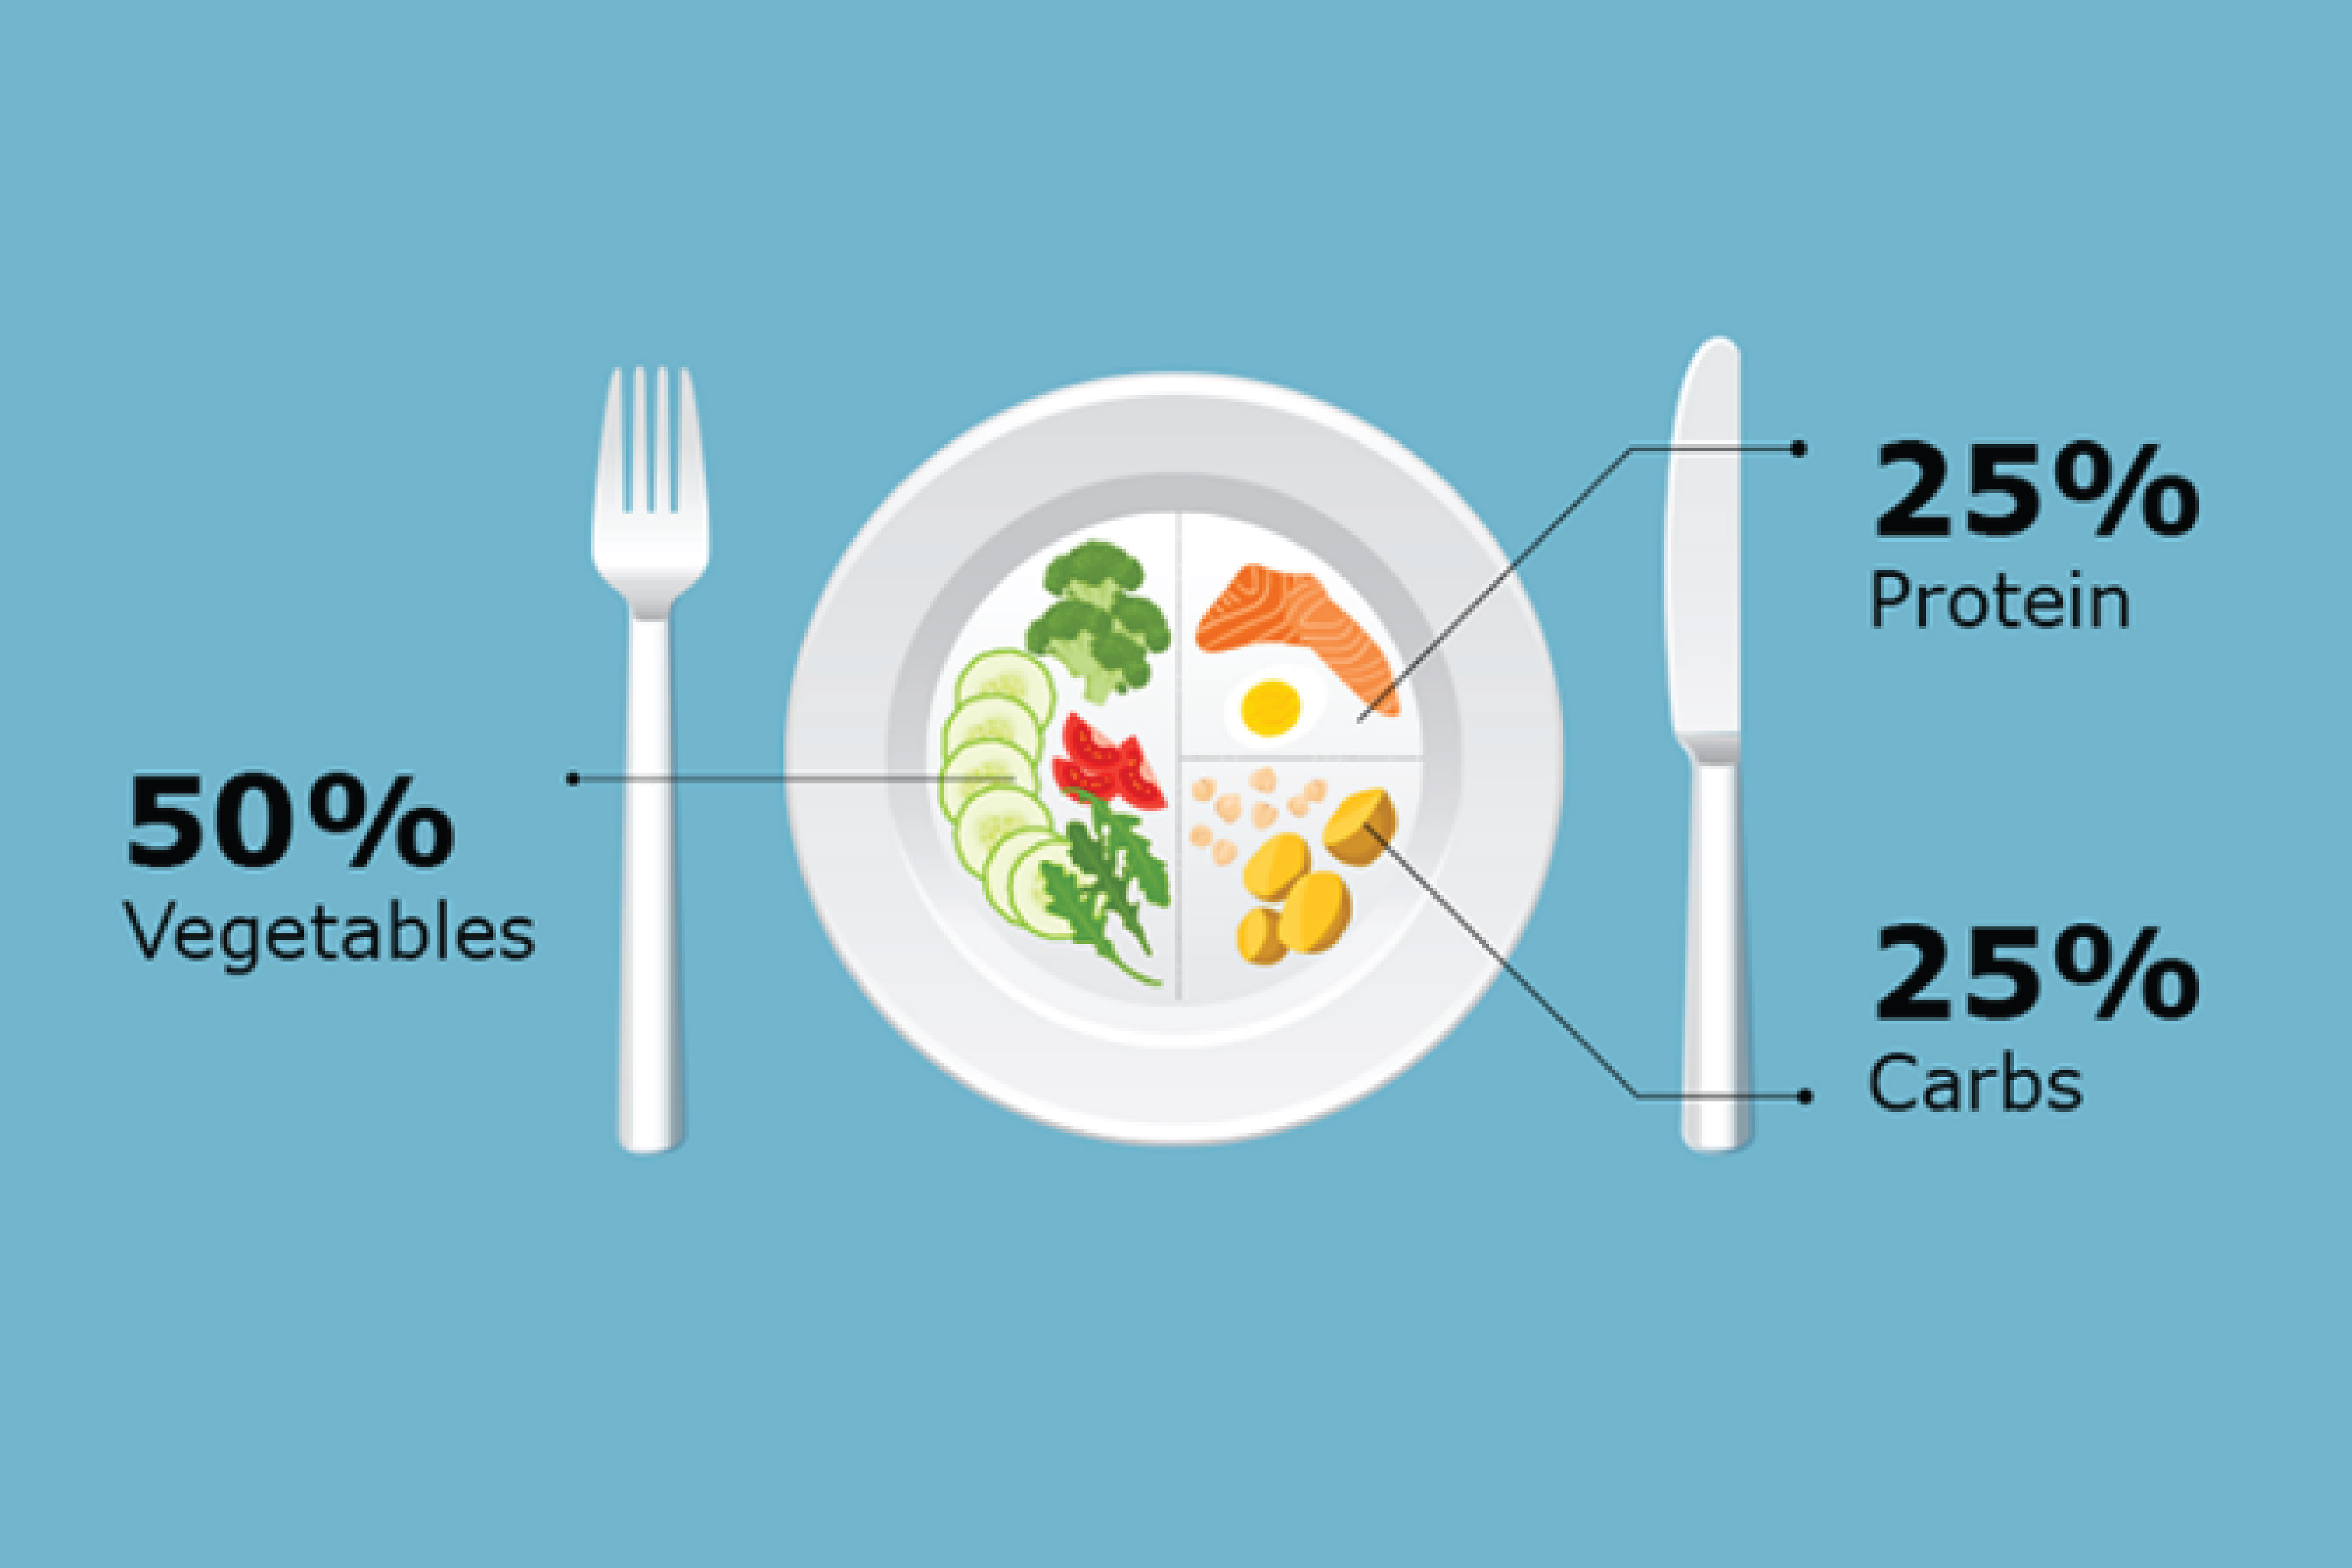 food plate for type 1 diabetes management, showing 50% vegetables, 25% protein, and 25% carbohydrates. The plate is divided into sections with examples of each food type